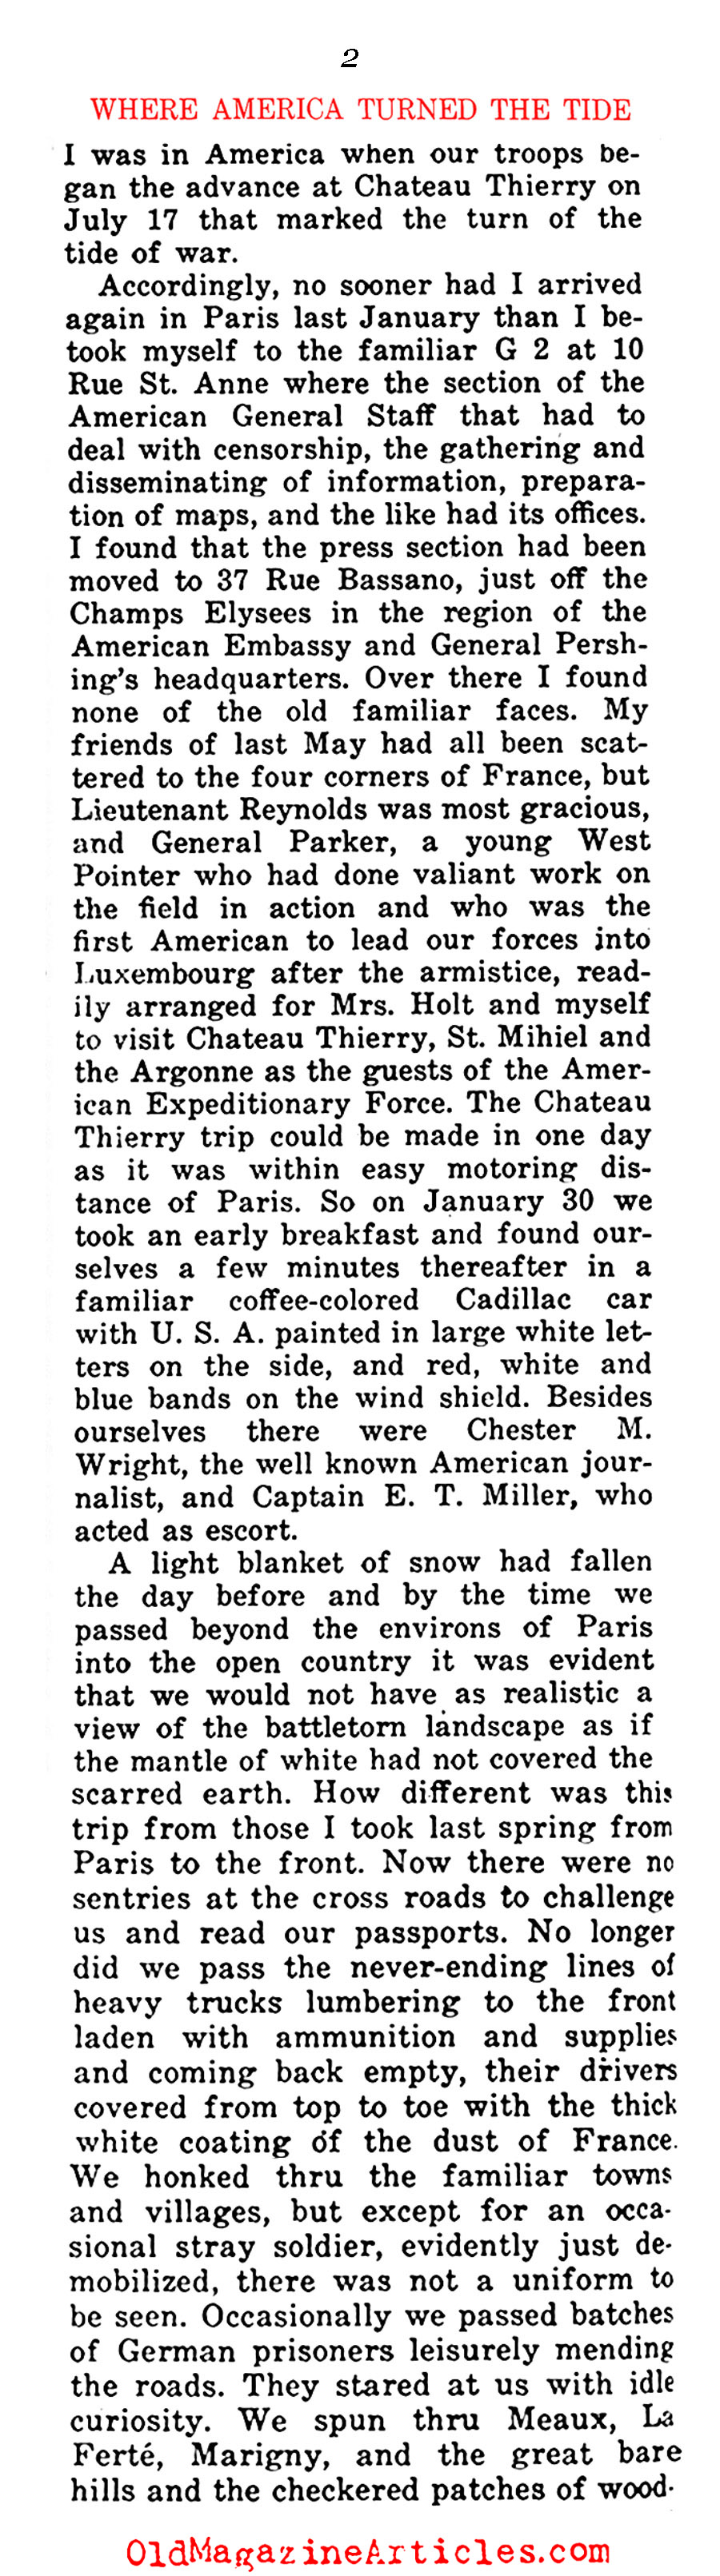 A Walk Through Five W.W. I American Battlefields  (The Independent, 1919)